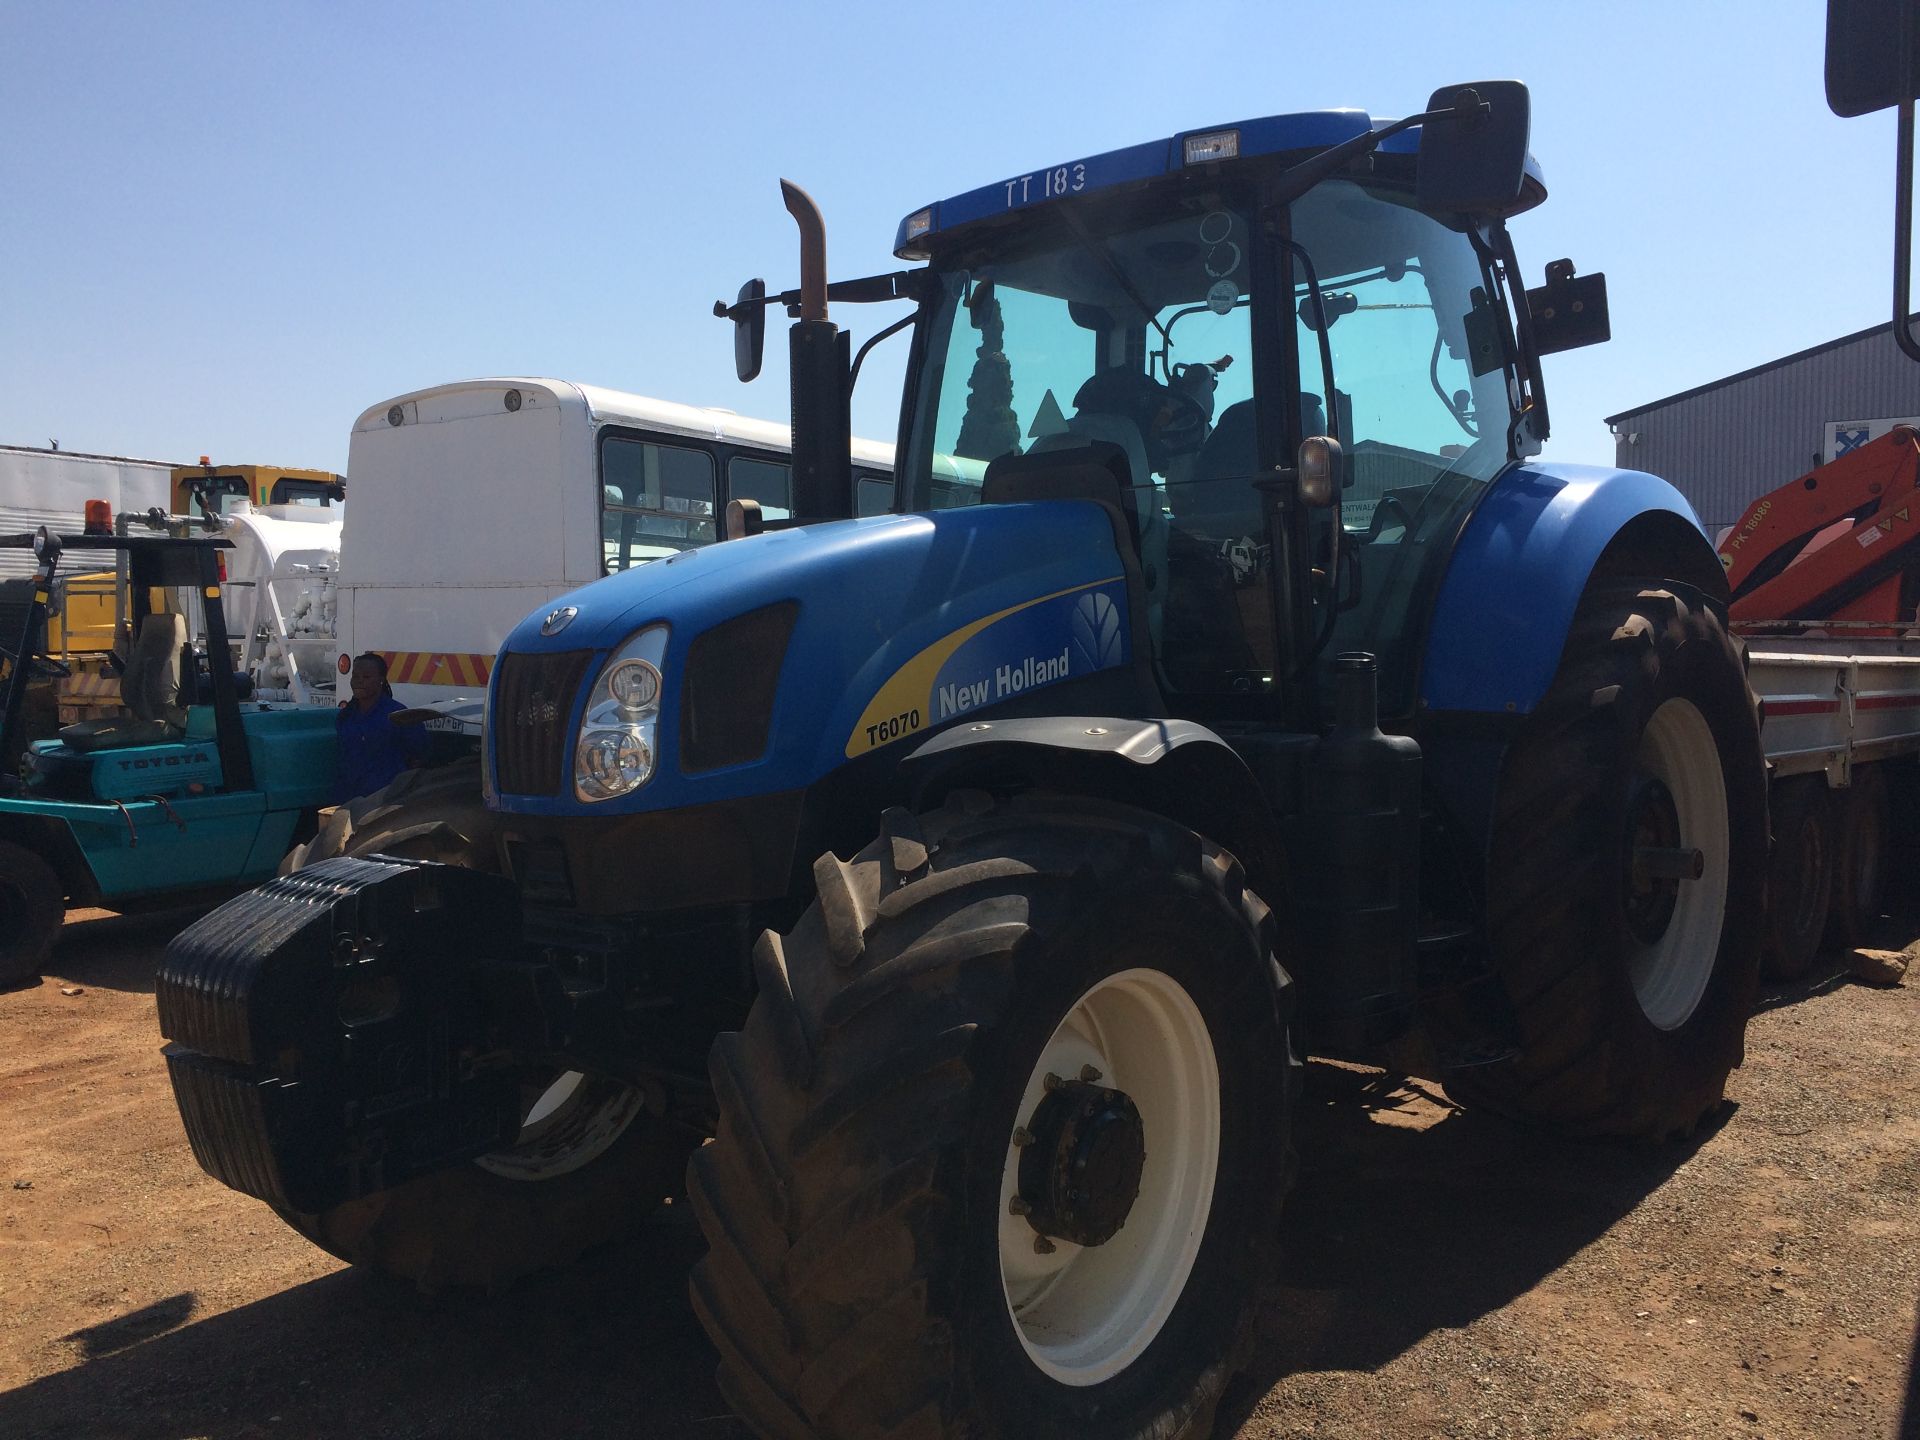 2010 NEW HOLLAND T6070 4X4 TRACTOR - SERIAL NO: Z9BK13515 - Image 2 of 4